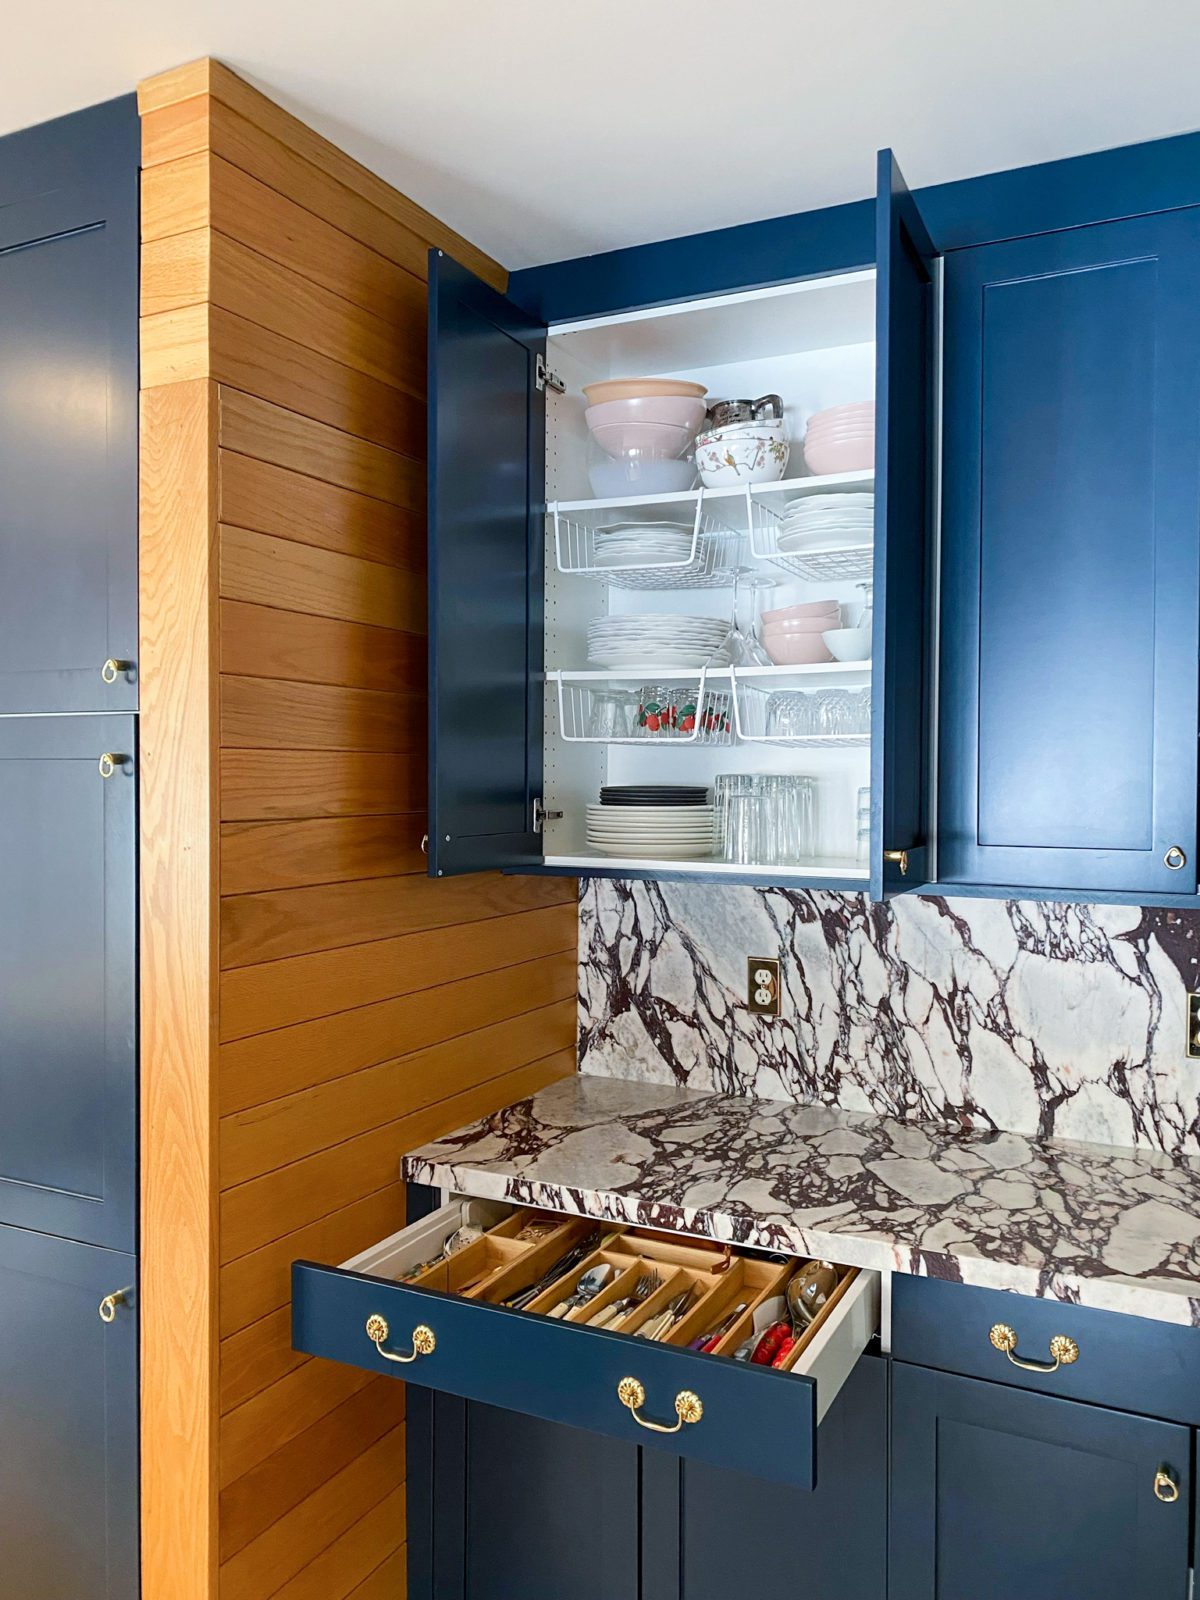 Kitchen cabinets and drawers from Boxi by Semihandmade are open to reveal the storage capabilities and what's inside. 